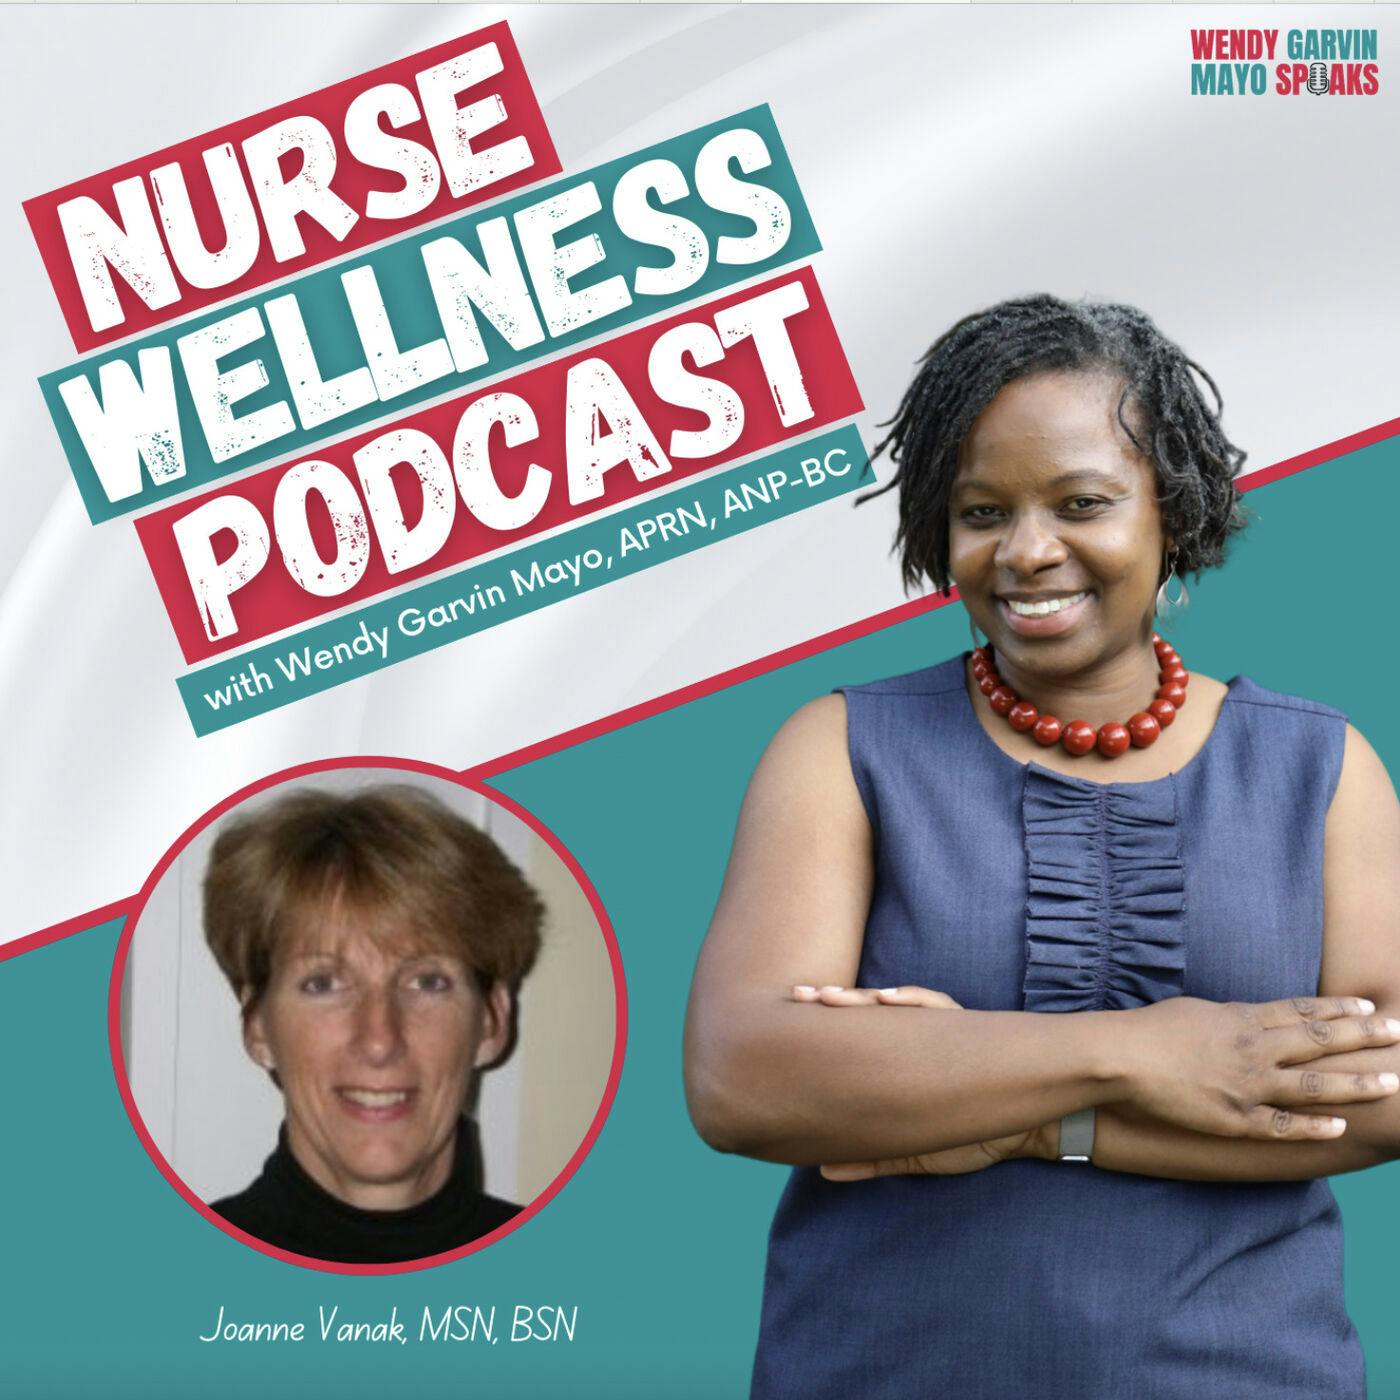 NWP: From Nurse Leader to Nurse Leaders: What Can We Do During This Time? Wendy with Joanne Vanak, MSN, BSN